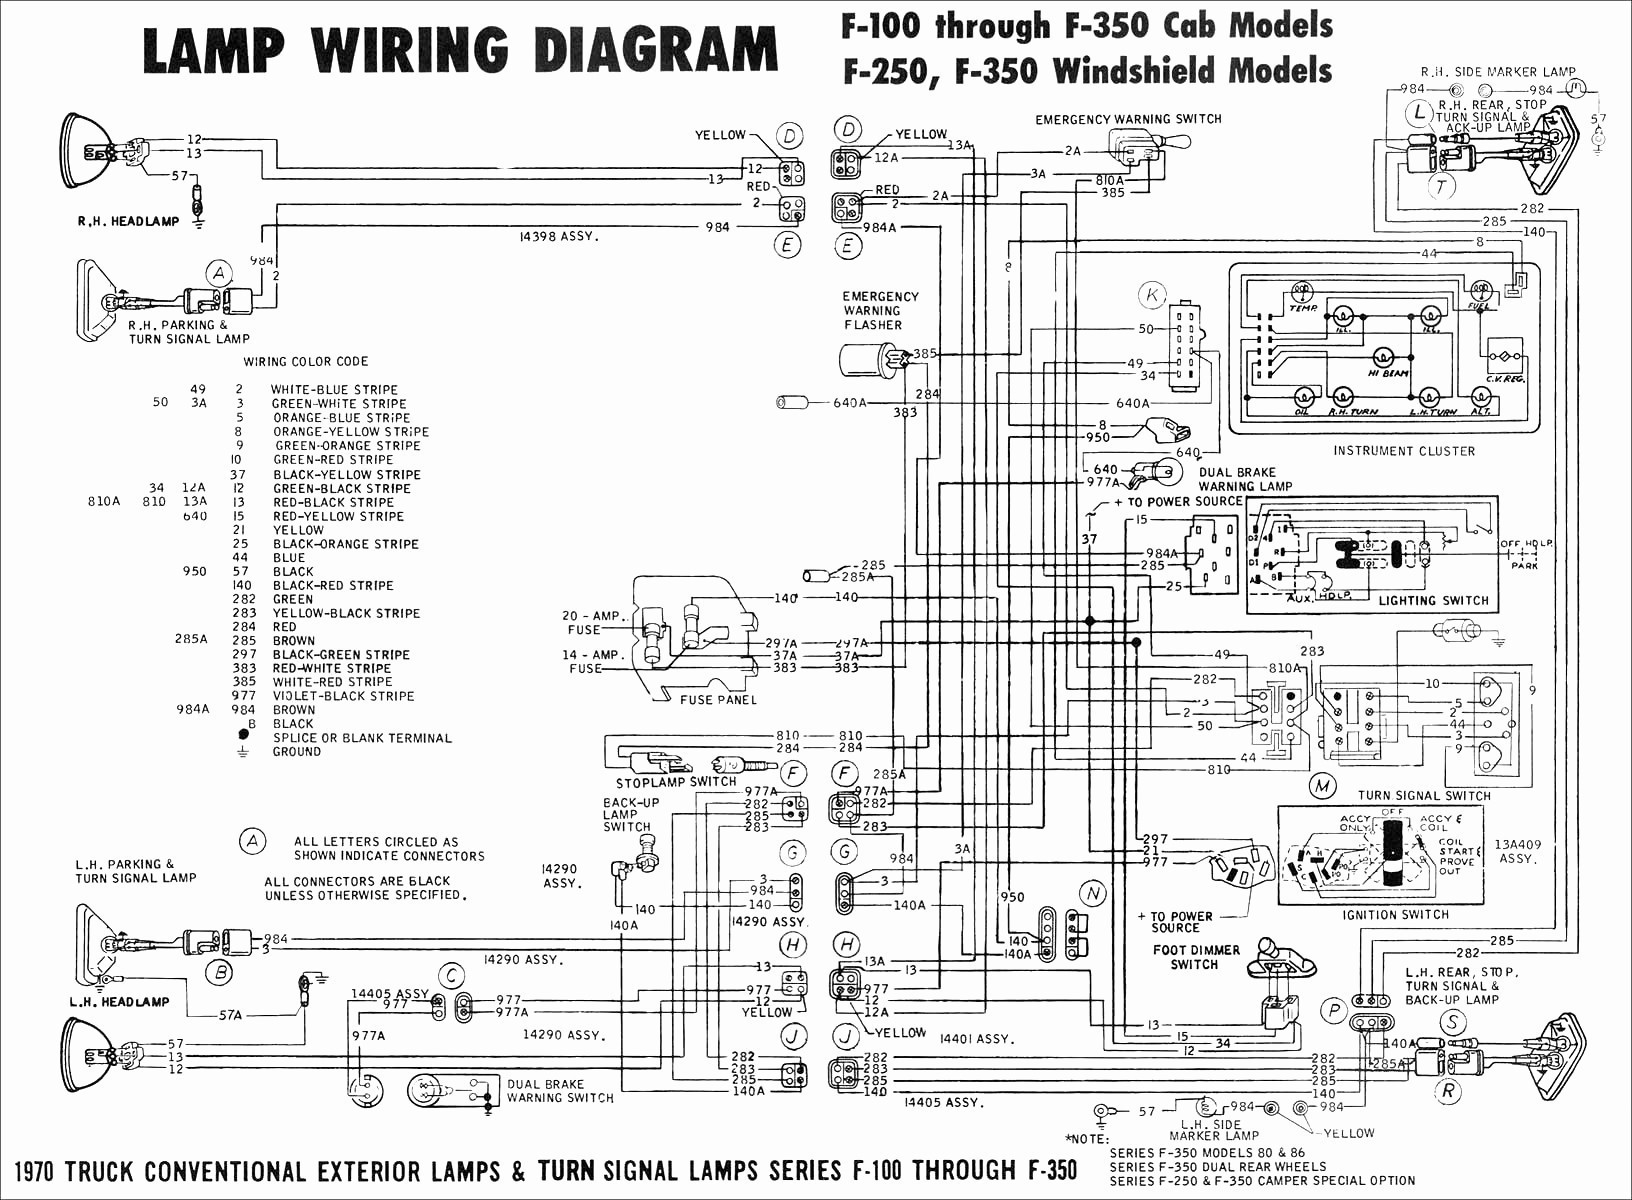 Ford Engine Parts Diagram 2008 ford F150 Parts Diagram Wiring Diagram Paper Of Ford Engine Parts Diagram